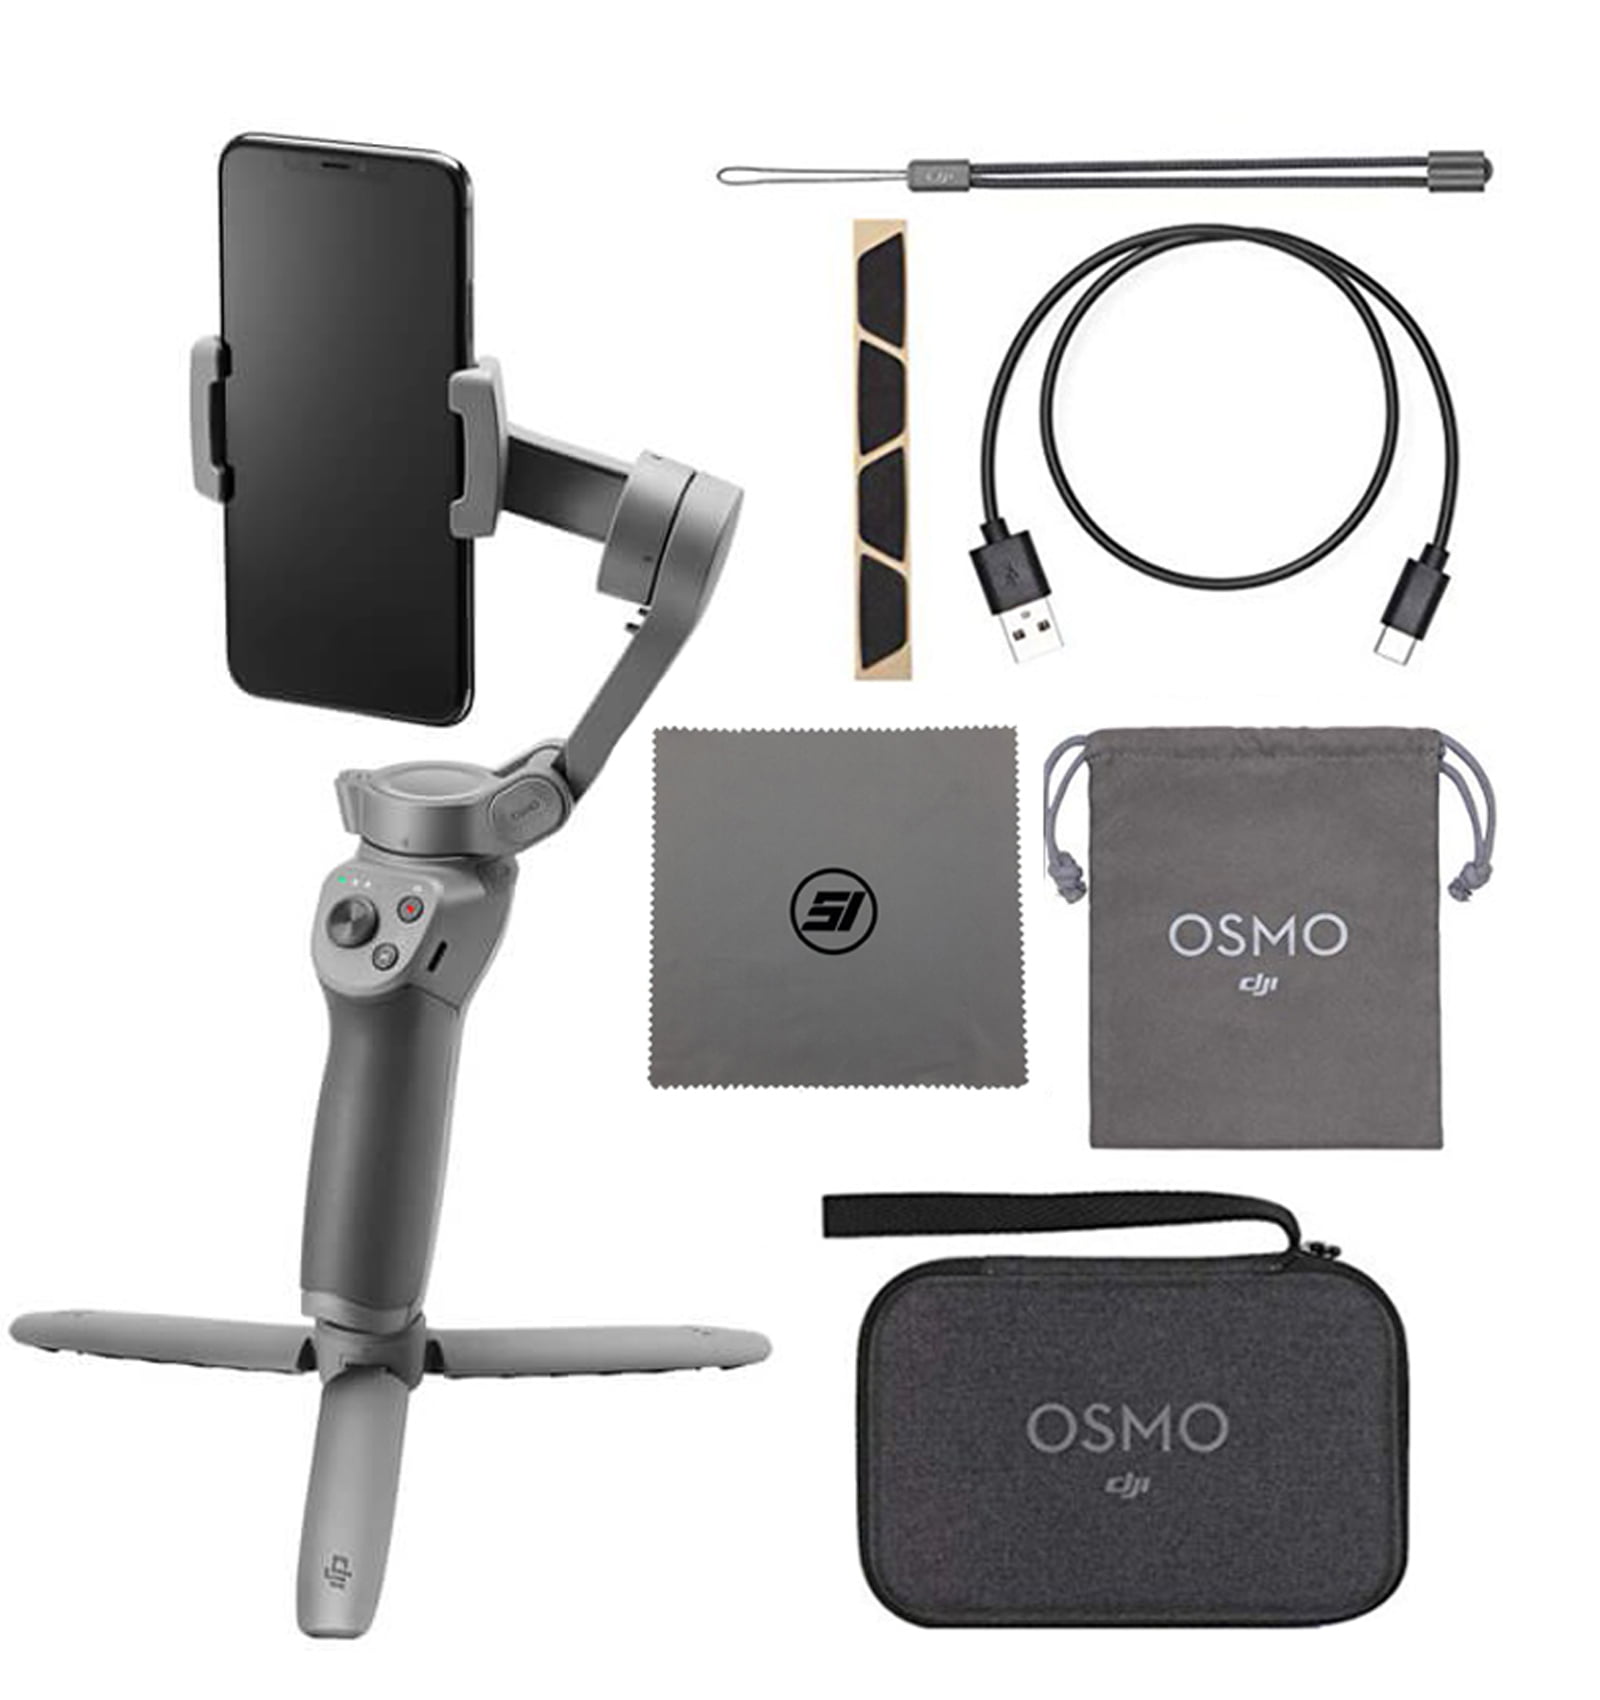 Dji Osmo Mobile 3 Combo Kit Store, 56% OFF | www.hcb.cat